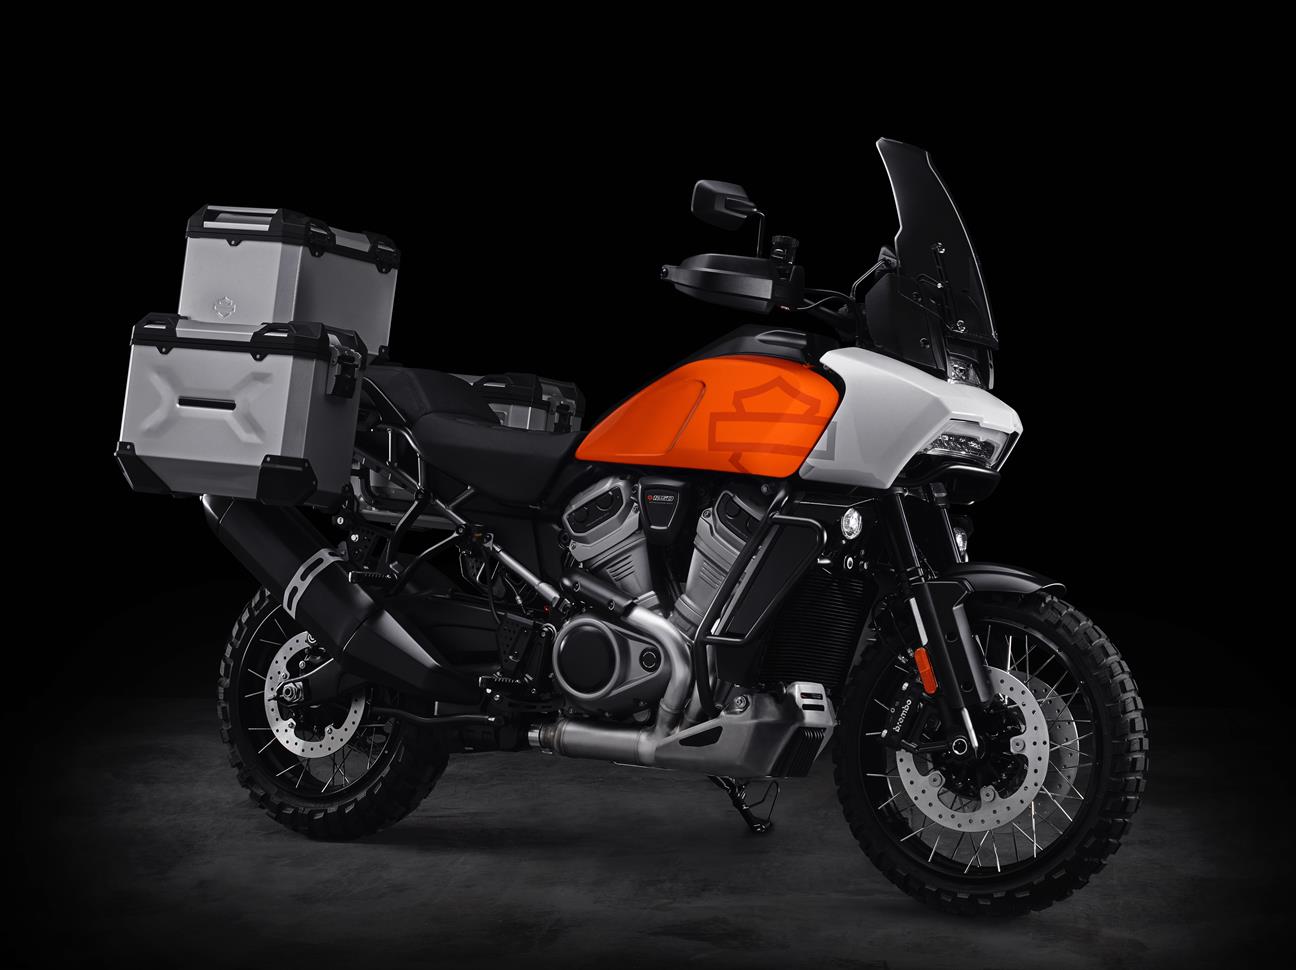 Harley-davidson To Showcase Key New Models And Technology At Motorcycle Live 2019